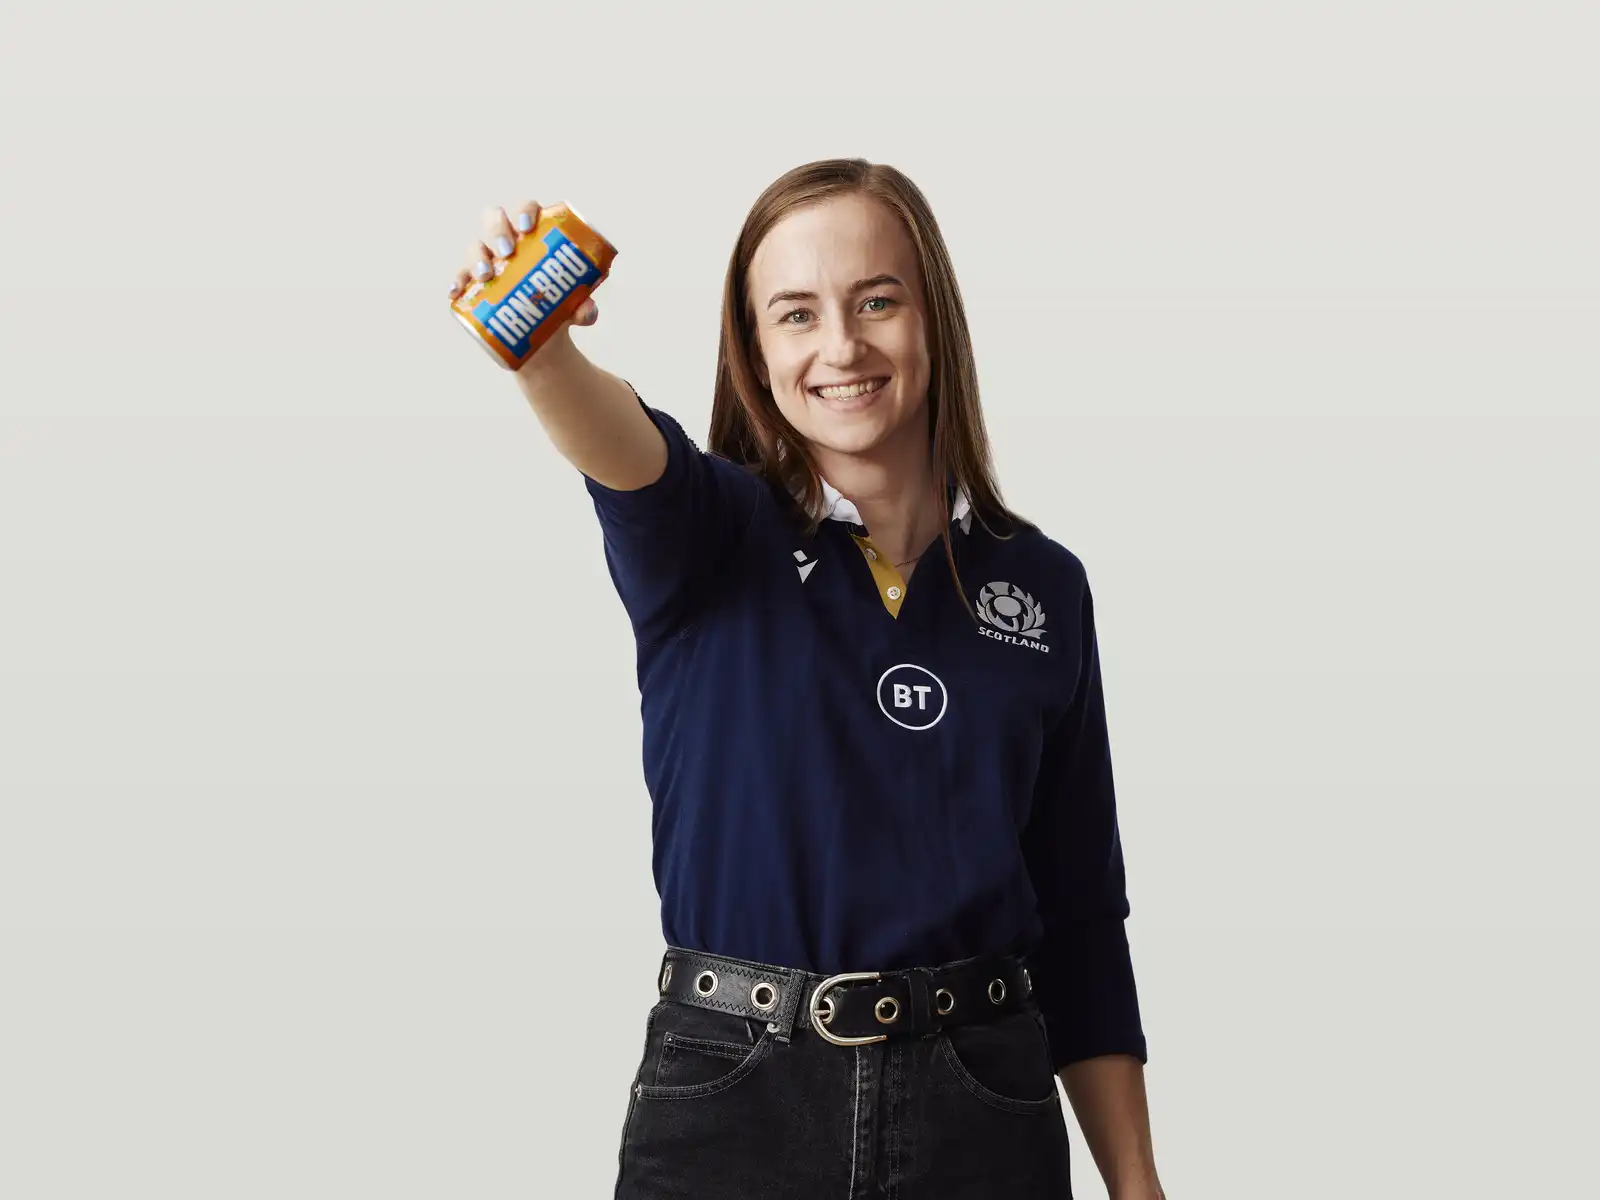 Sarah F wearing a Scotland rugby jersey and holding up a can of Irn Bru